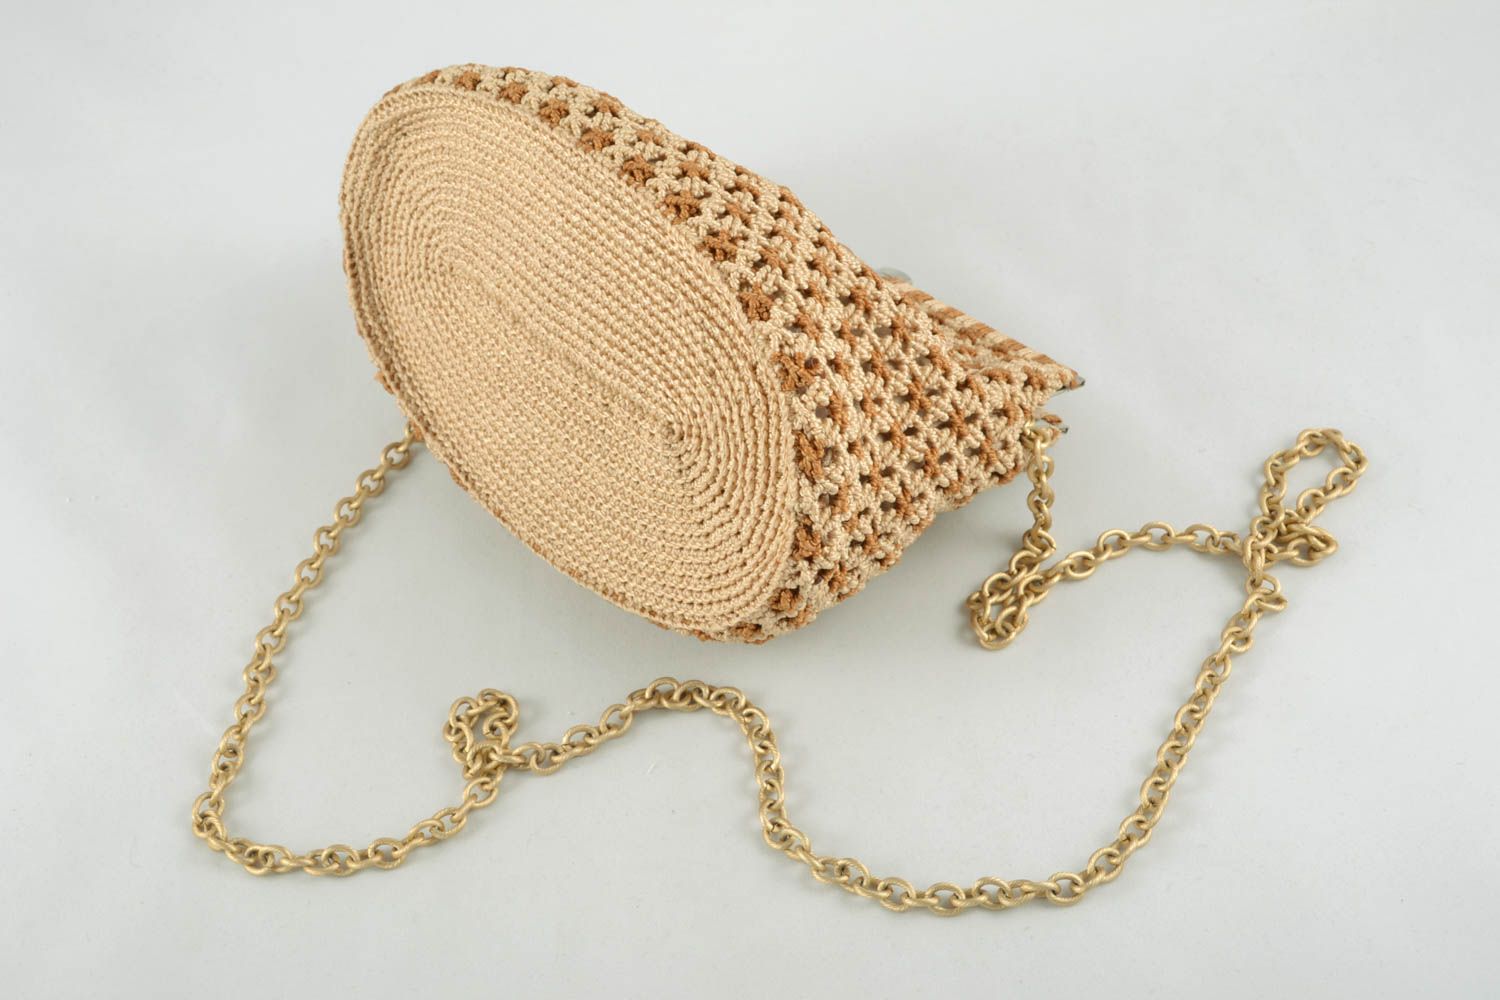 Macrame woven bag with a chain photo 4